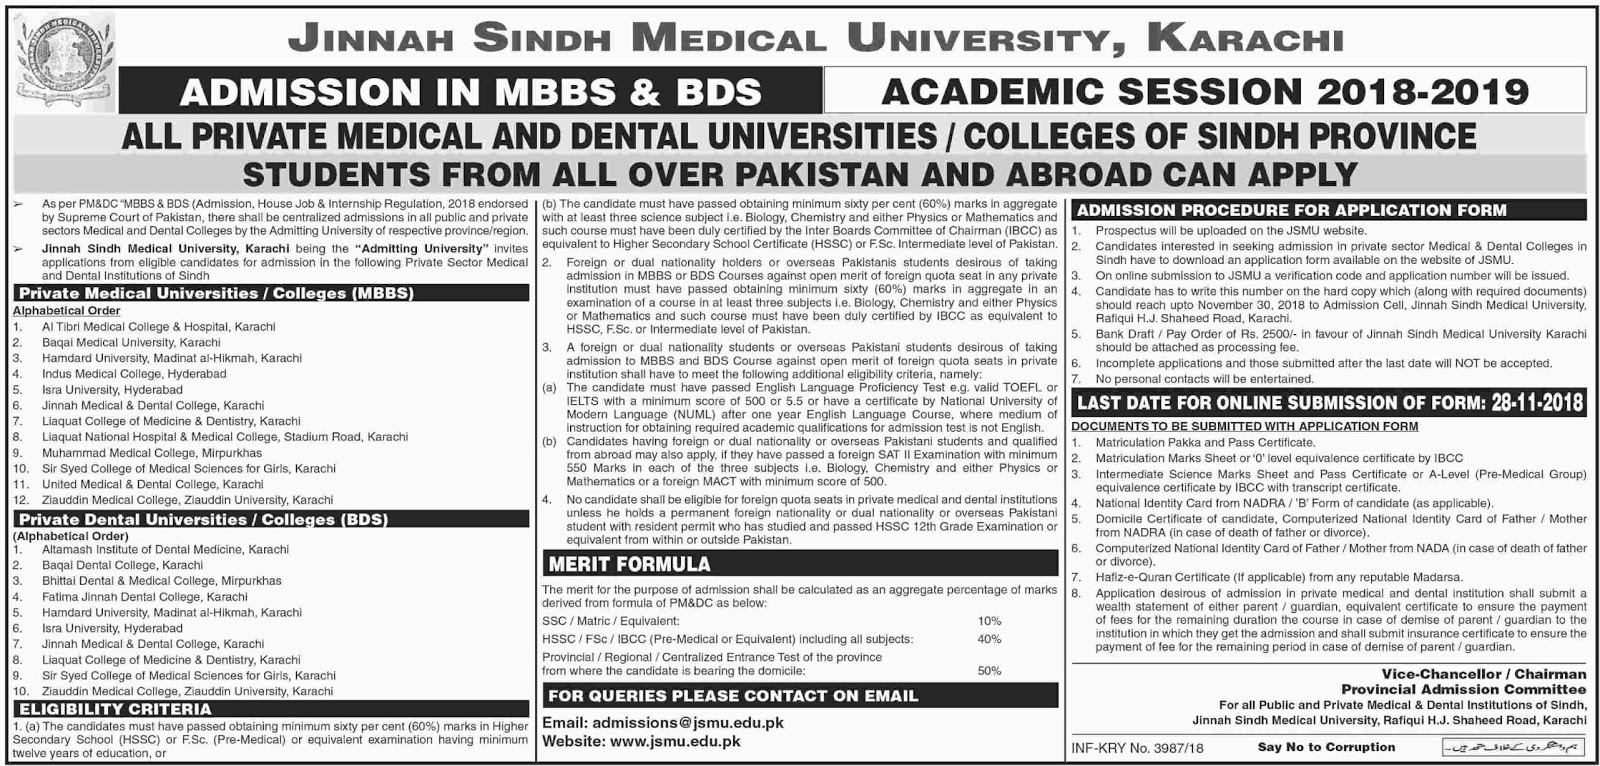 A Complete guide for Admission in Private Medical colleges of Sindh.